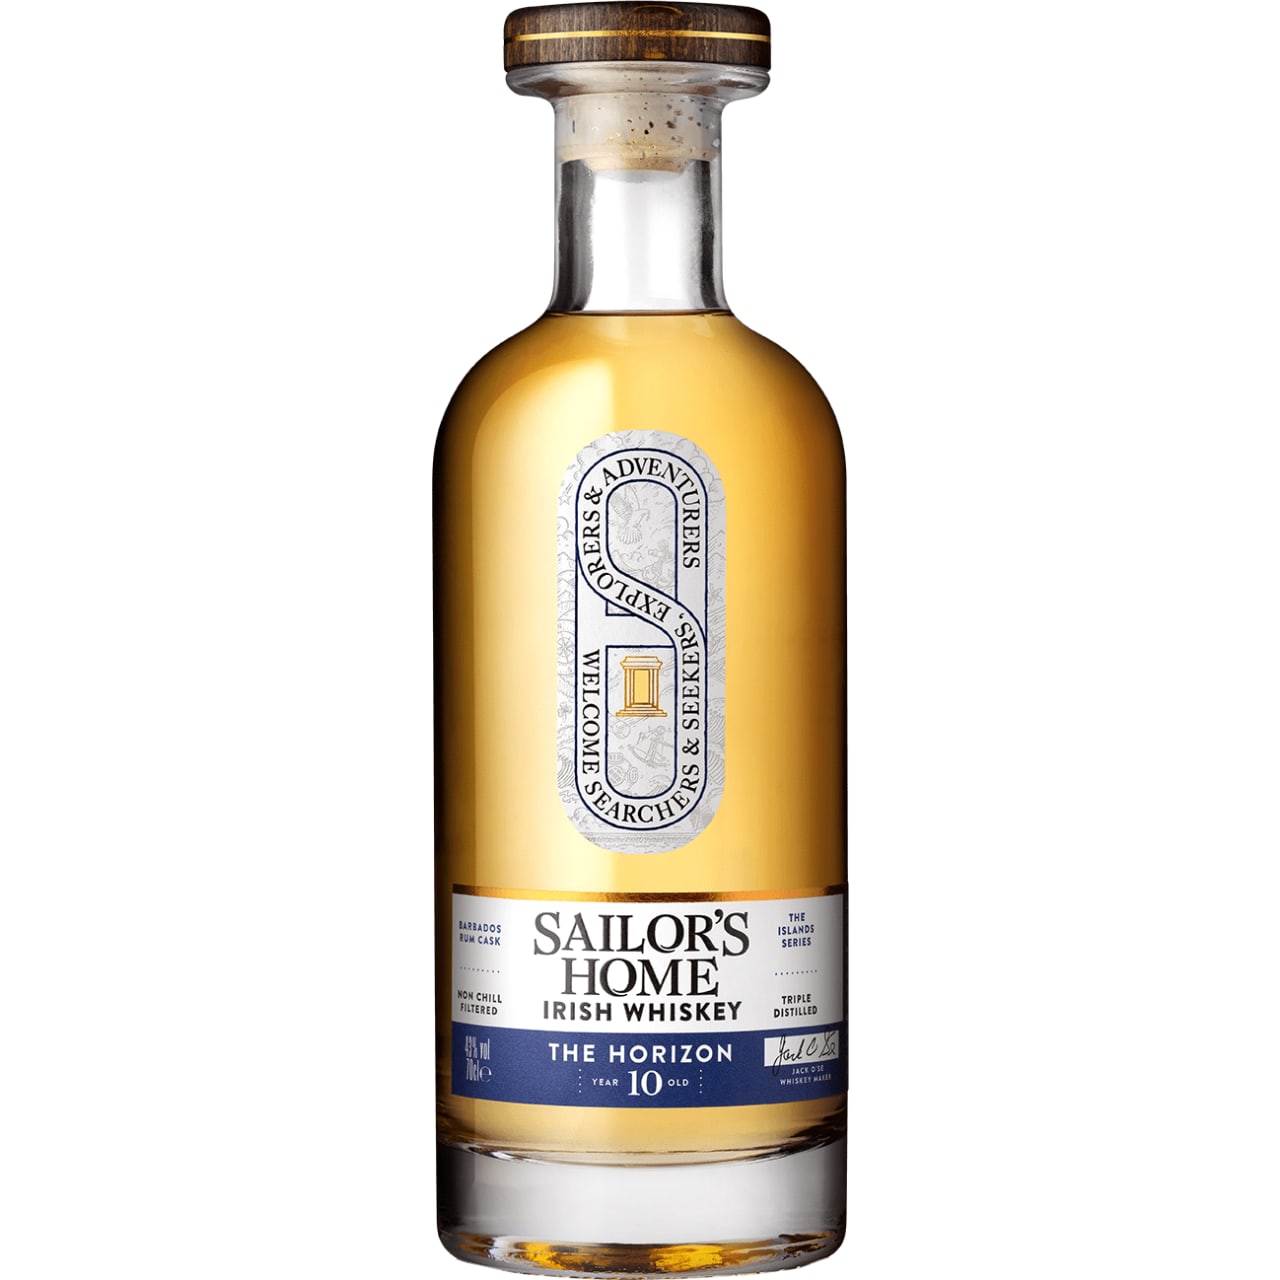 The Horizon is a 10 year old blended Irish whiskey from the Sailor's Home range, initially matured in bourbon casks, before being treated to a finishing period in Barbados rums casks.